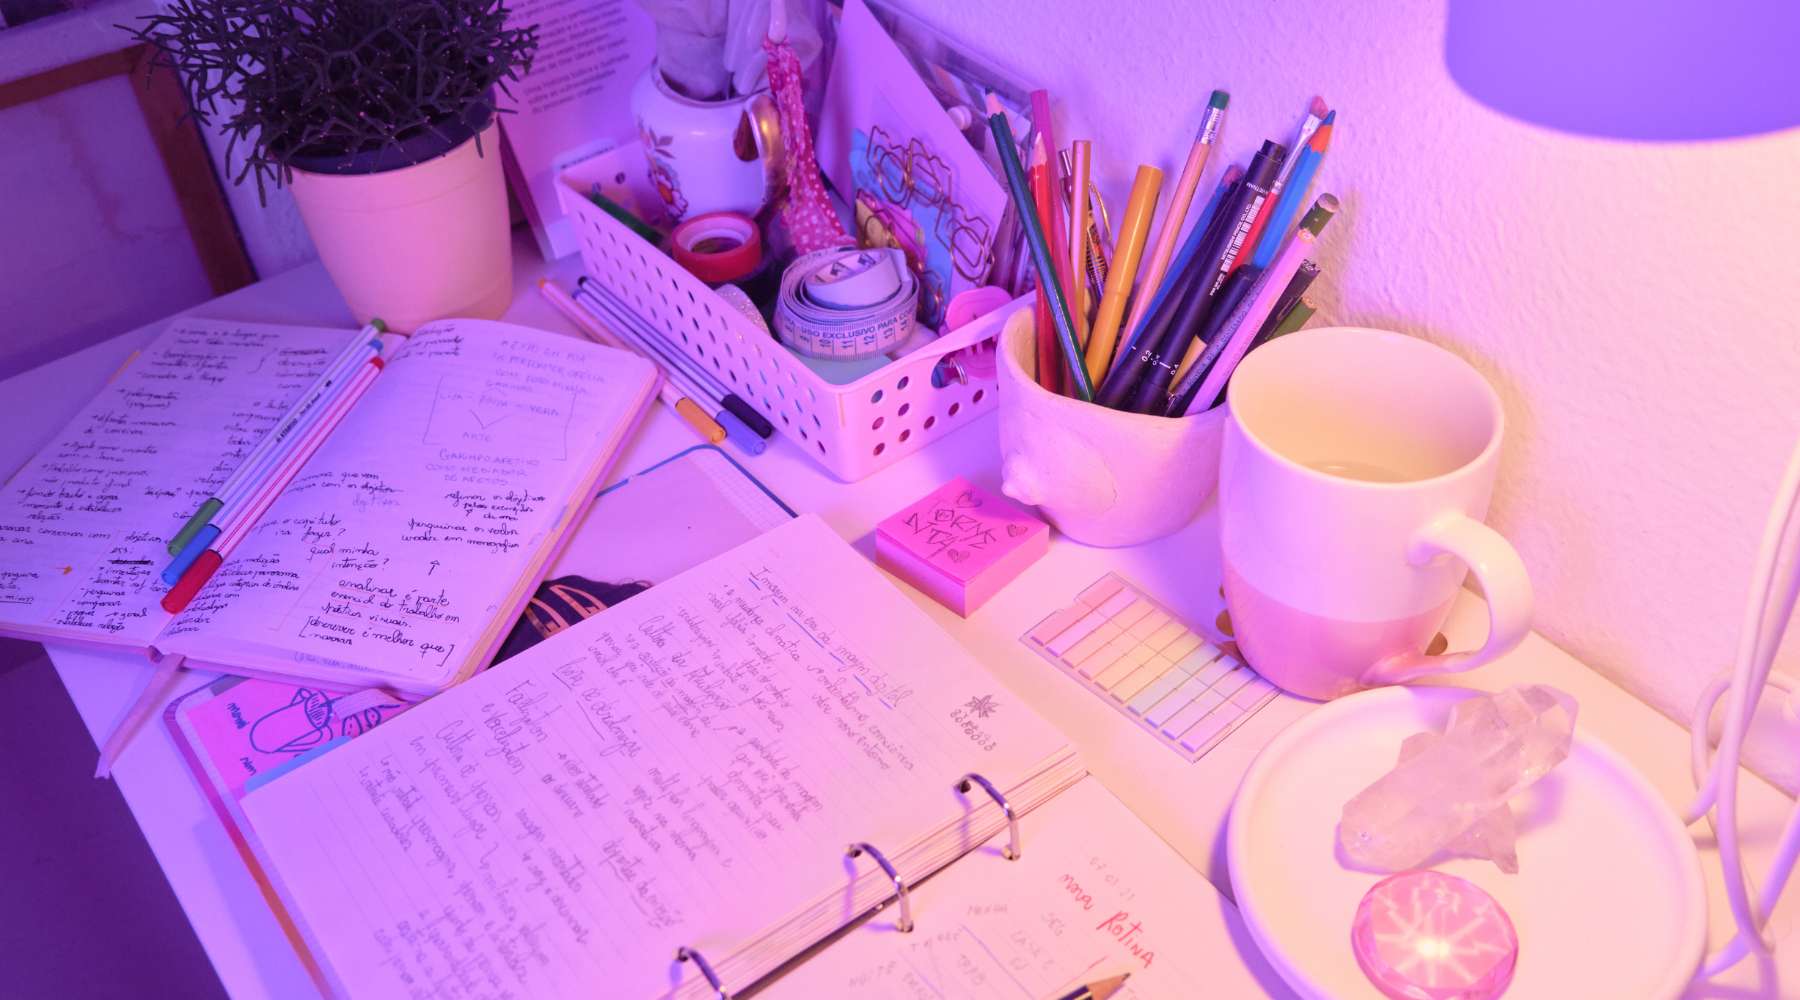 A cluttered home office desk